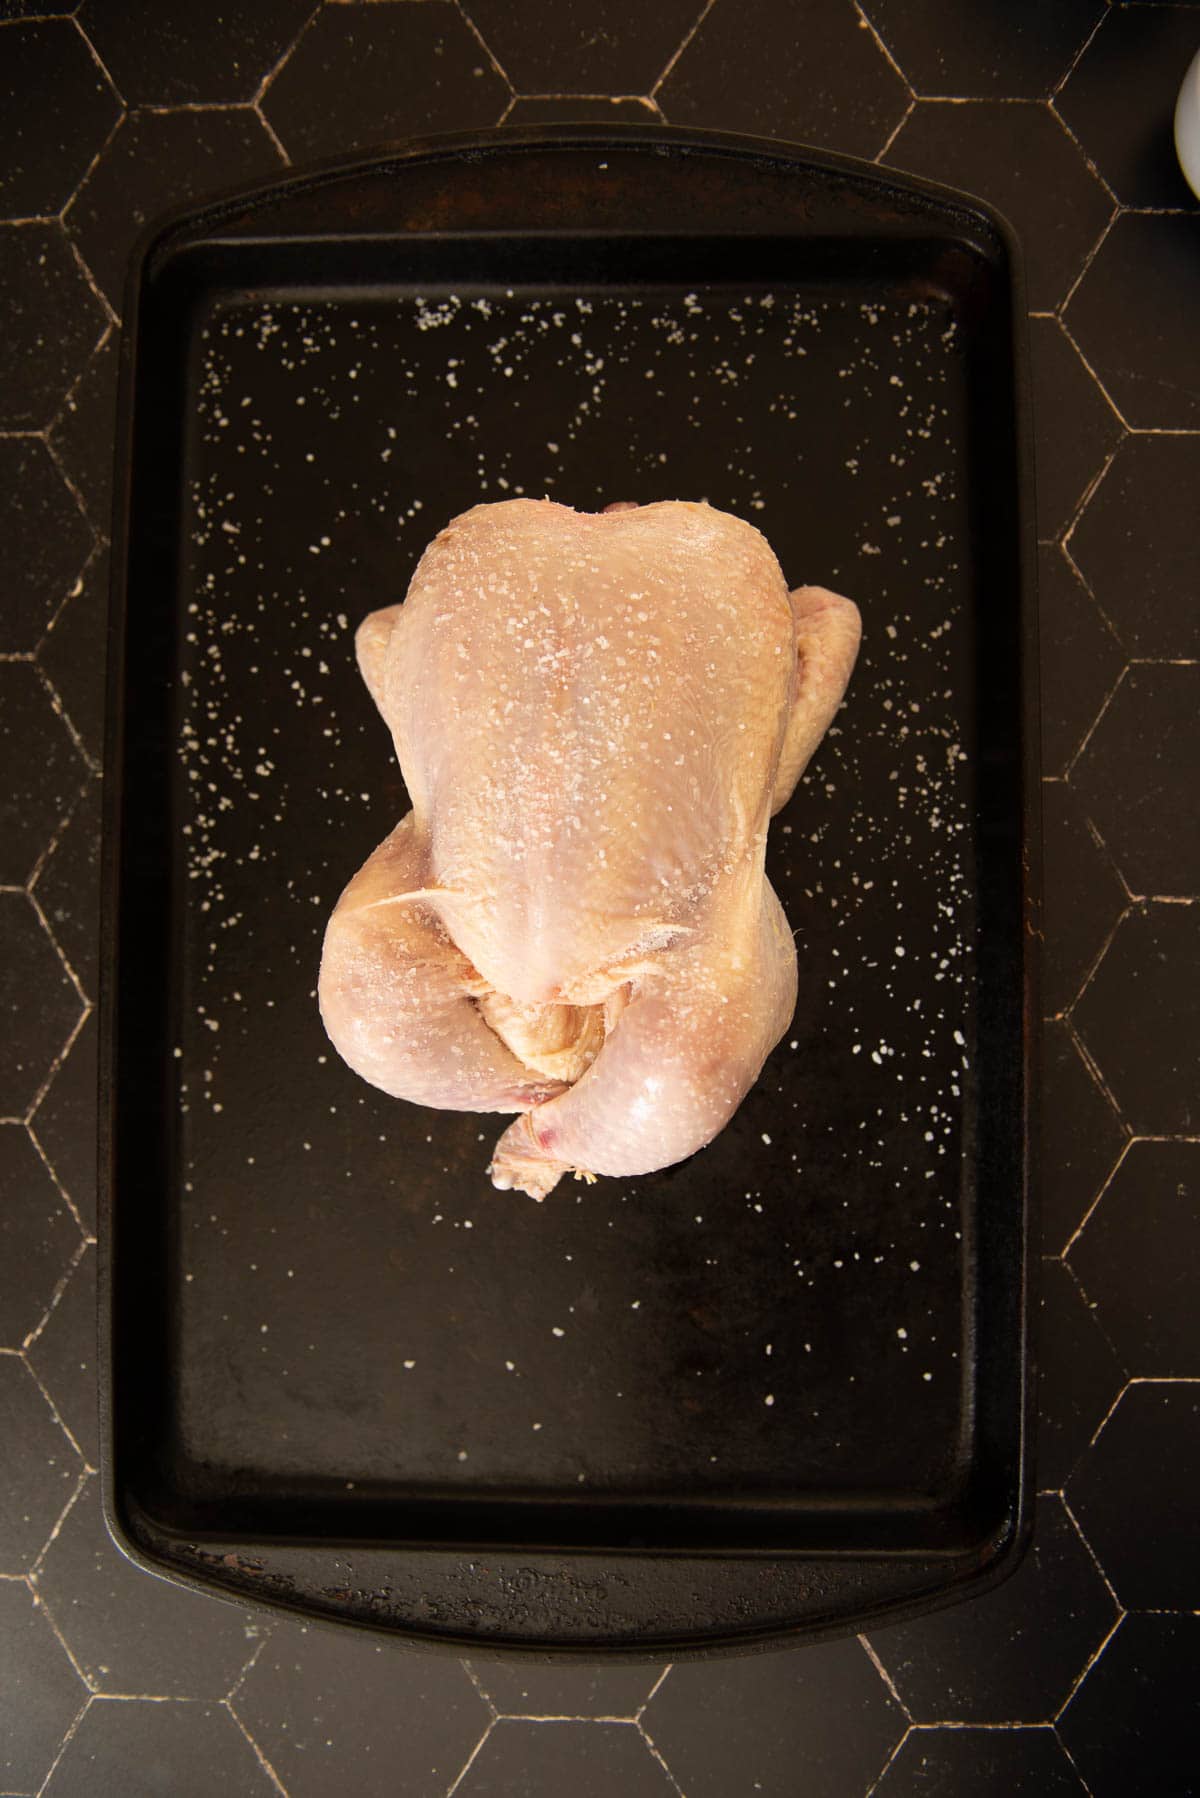 A chicken is sitting on a black baking tray, salted.